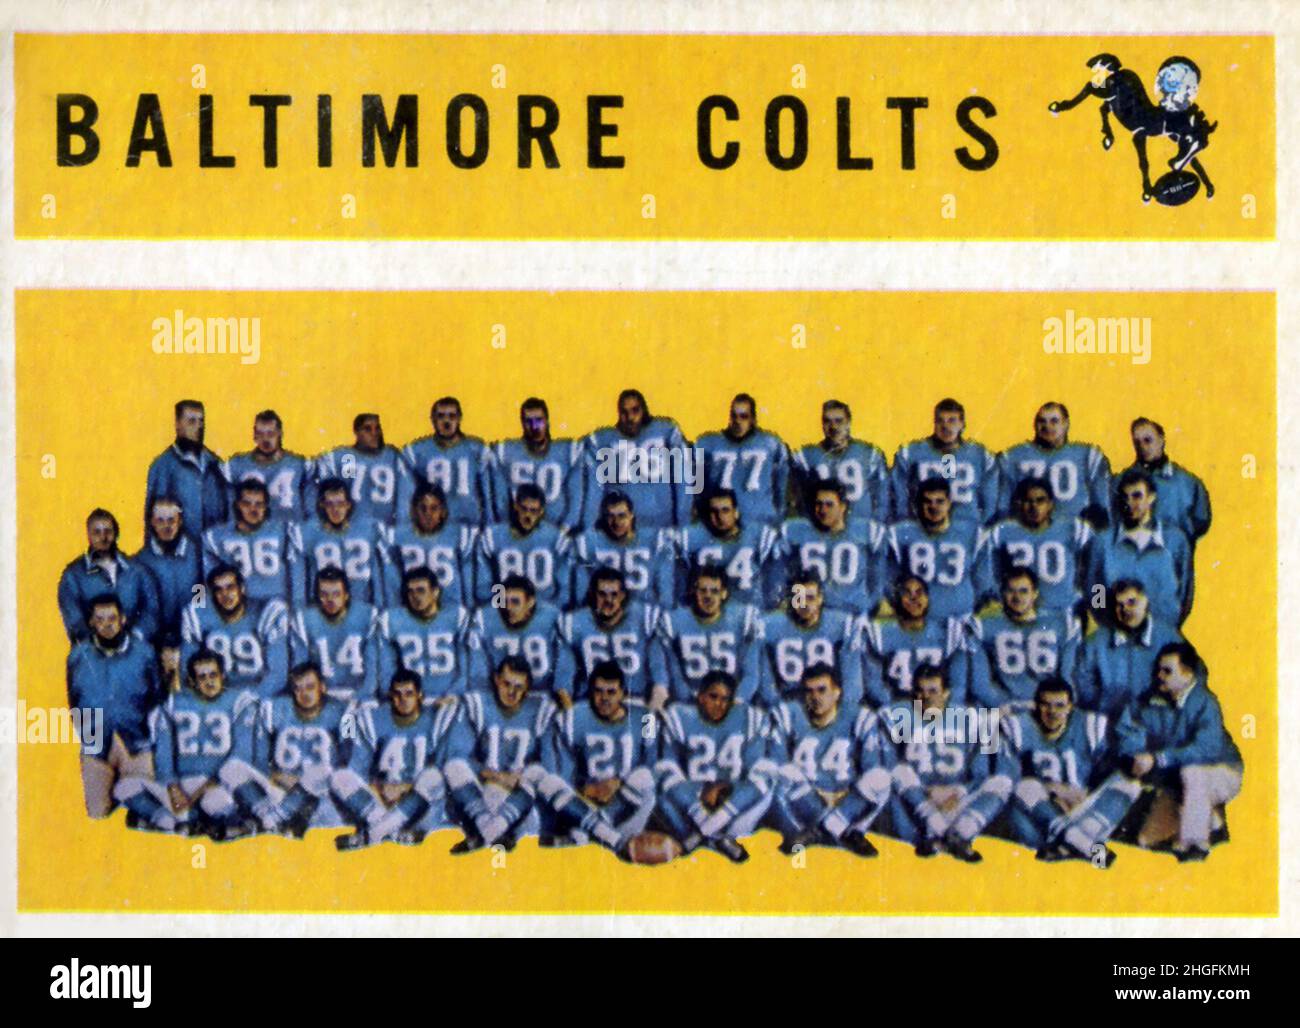 Baltimore Colts Topps 1960 Topps team Football Card Stock Photo